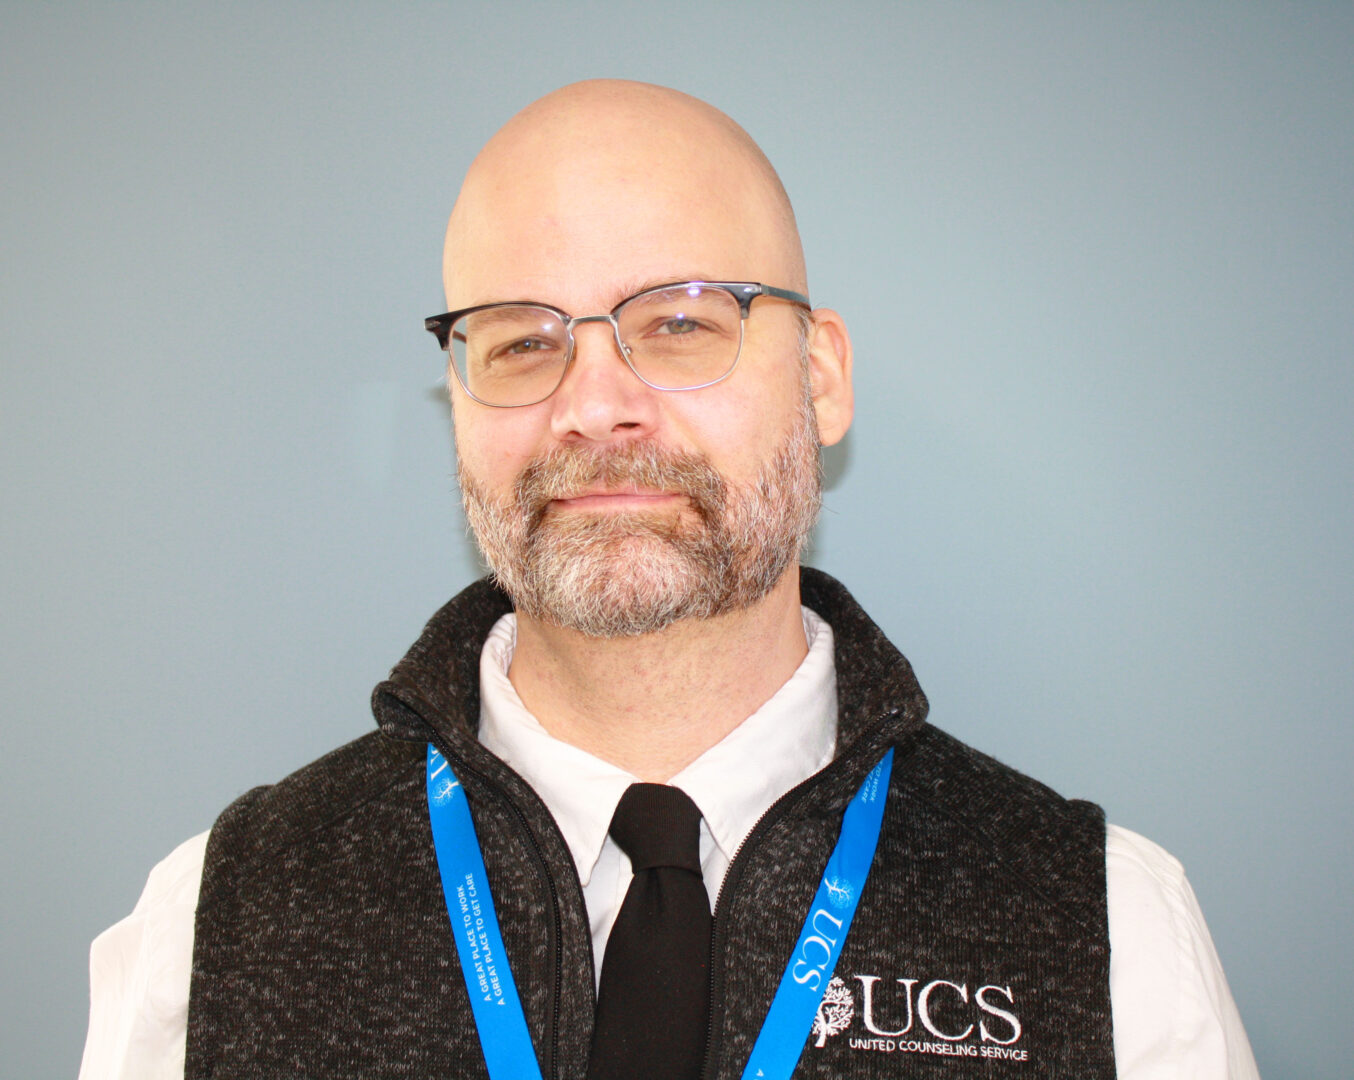 A man with glasses wearing a black UCS vest, black tie, blue lanyard, and white shirt smiles.